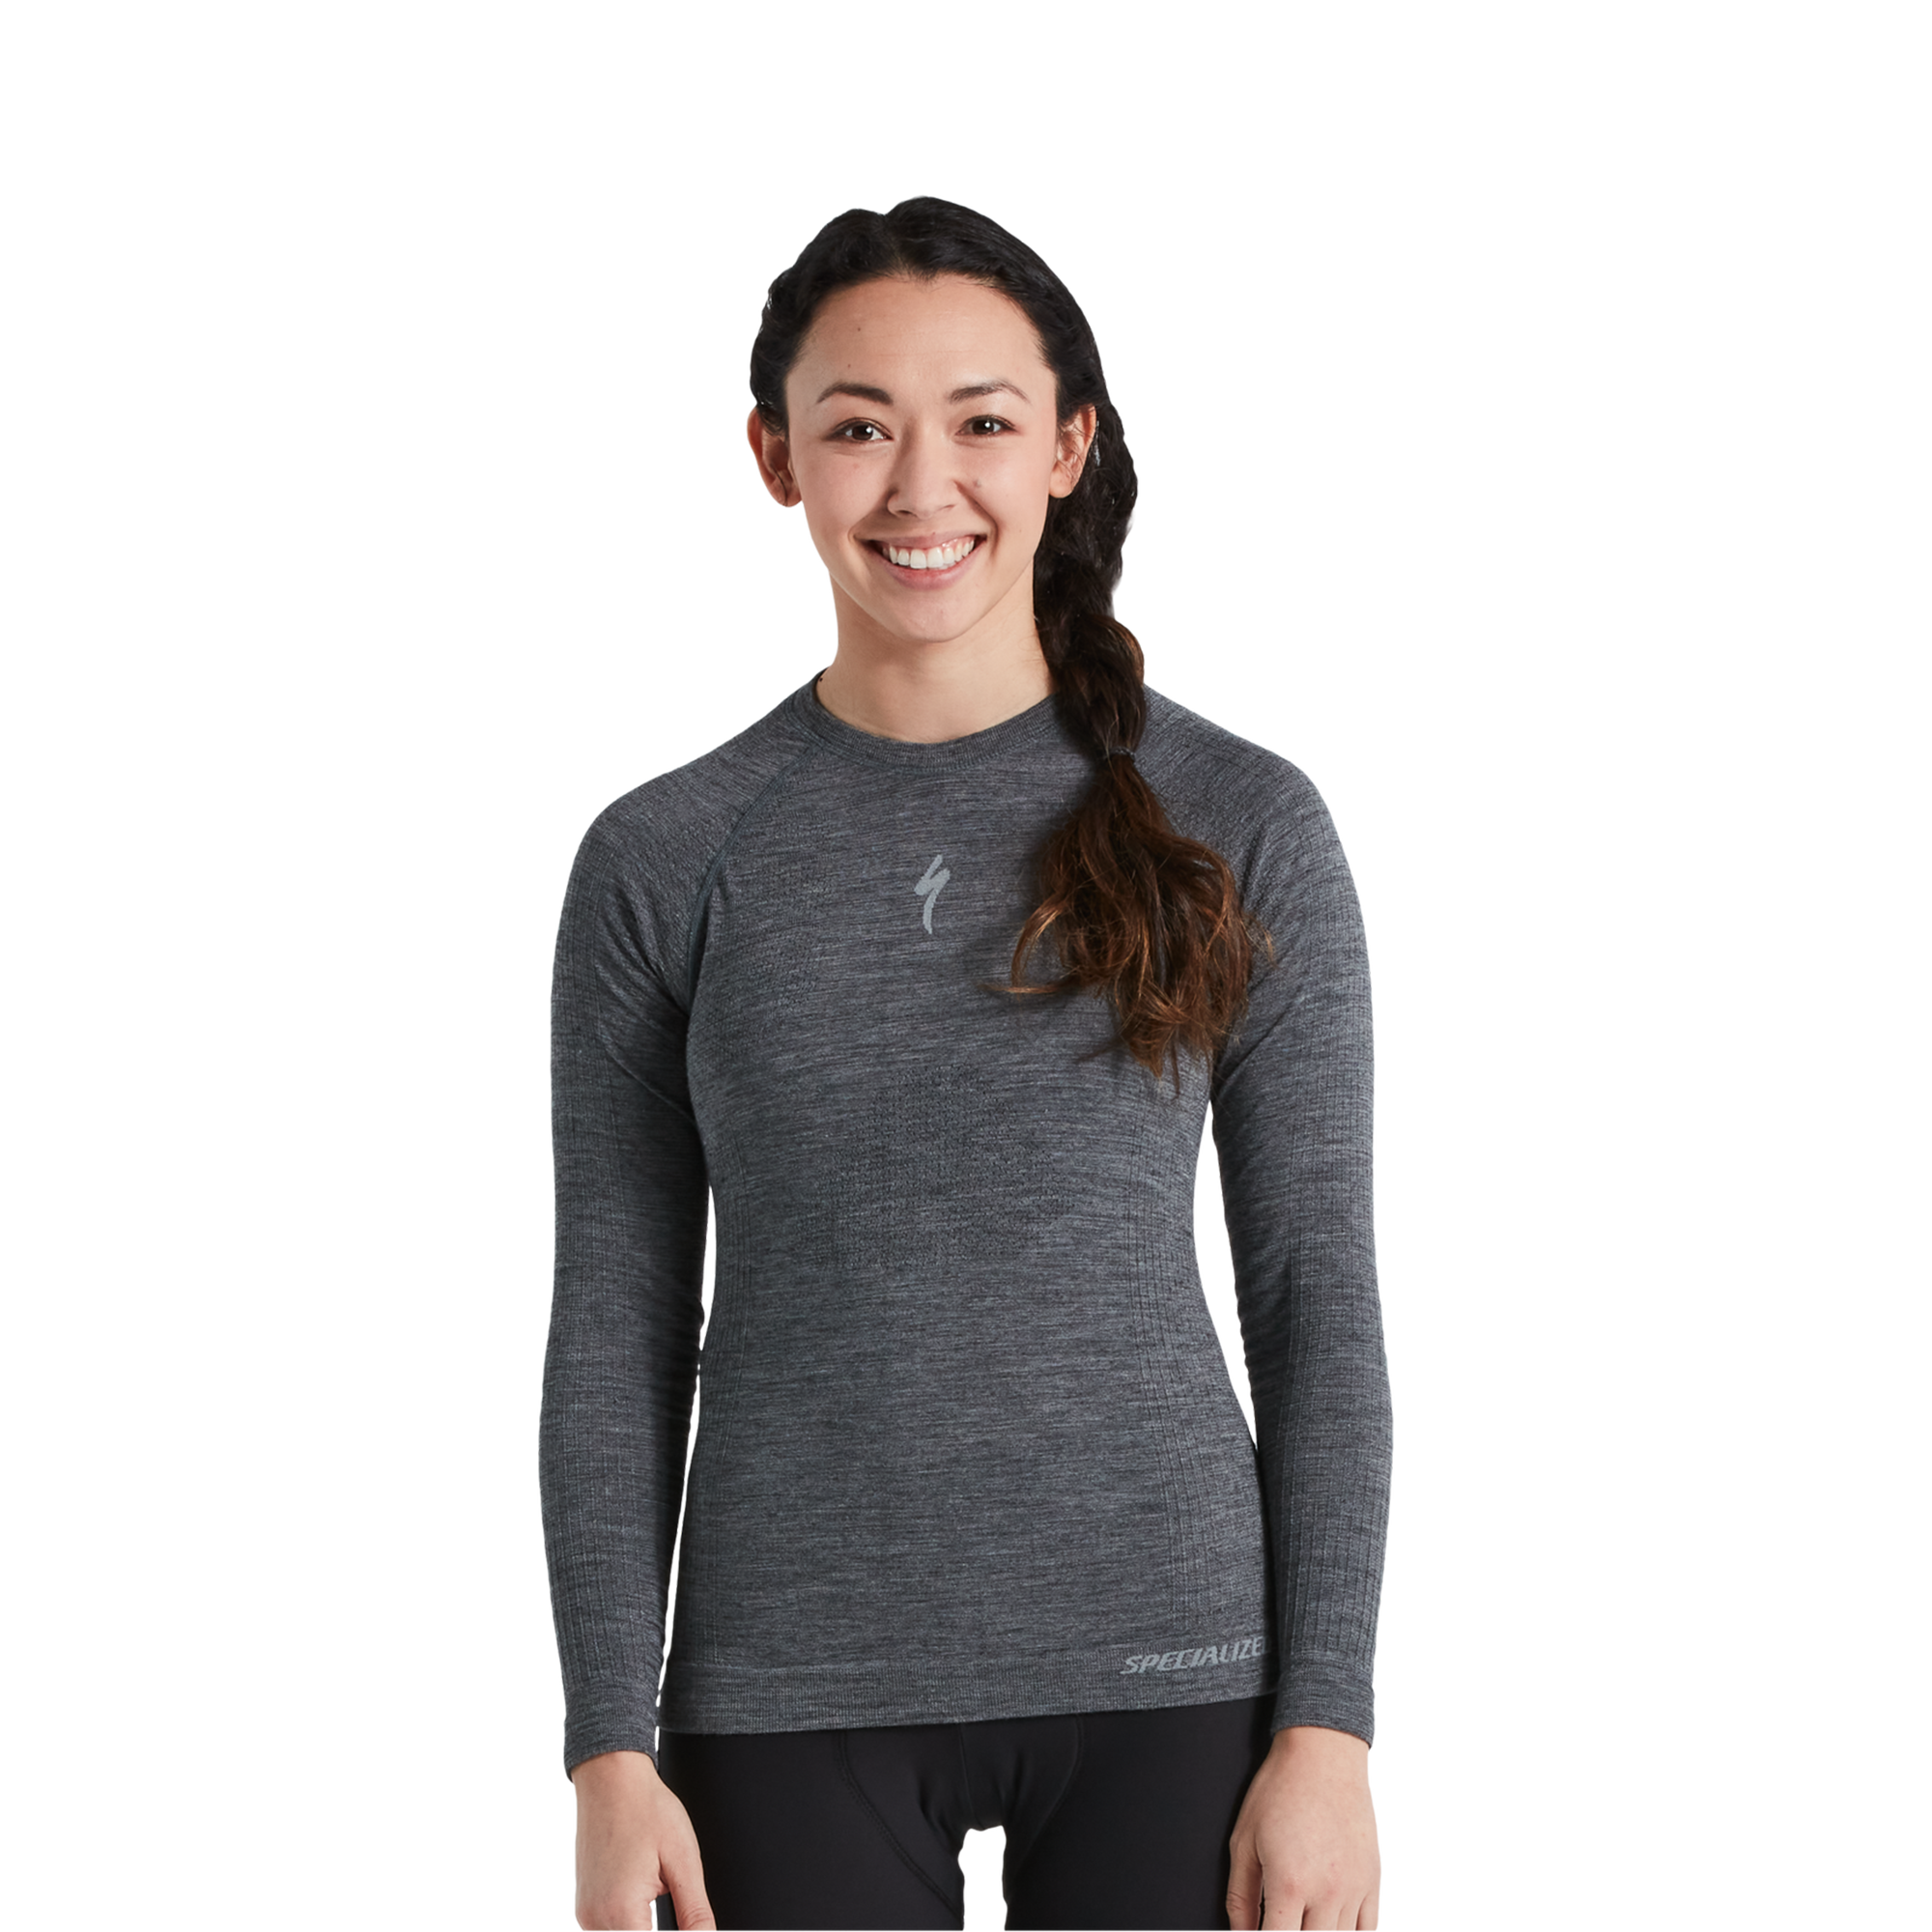 https://assets.specialized.com/i/specialized/64122-150_APP_SEAMLESS-MERINO-BASELAYER-LS-WMN-GRY-S-M_PLP-HERO-SQUARE?$scom-plp-product-image-square$&fmt=auto